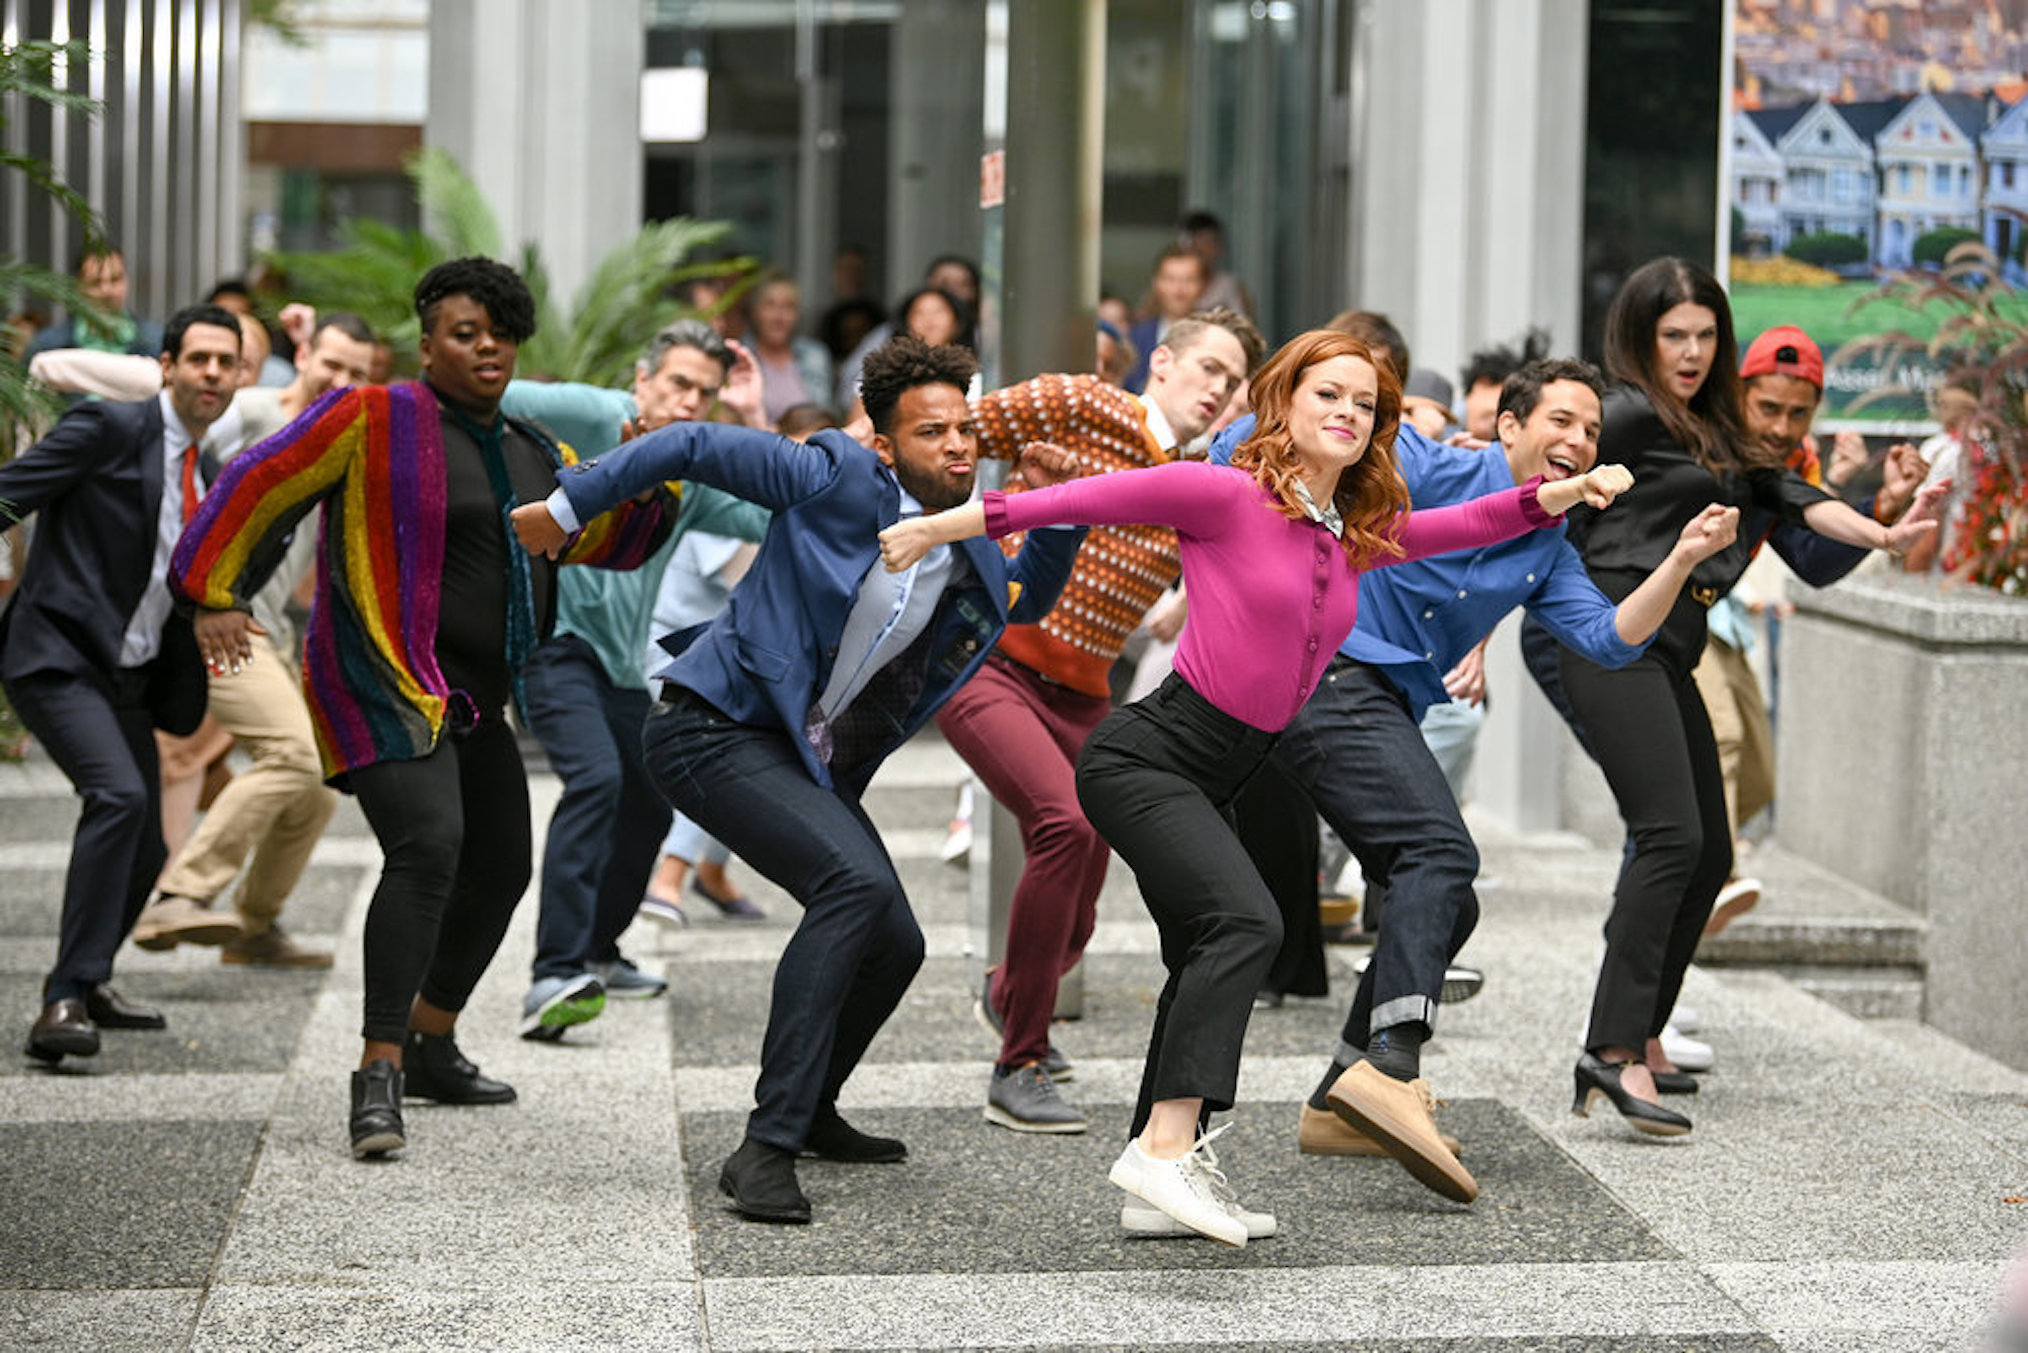 The cast of the show in a big dance number in a shot from Zoey's Extraordinary Playlist, 2020-present (Photo by Sergei Bachlakov/NBC)